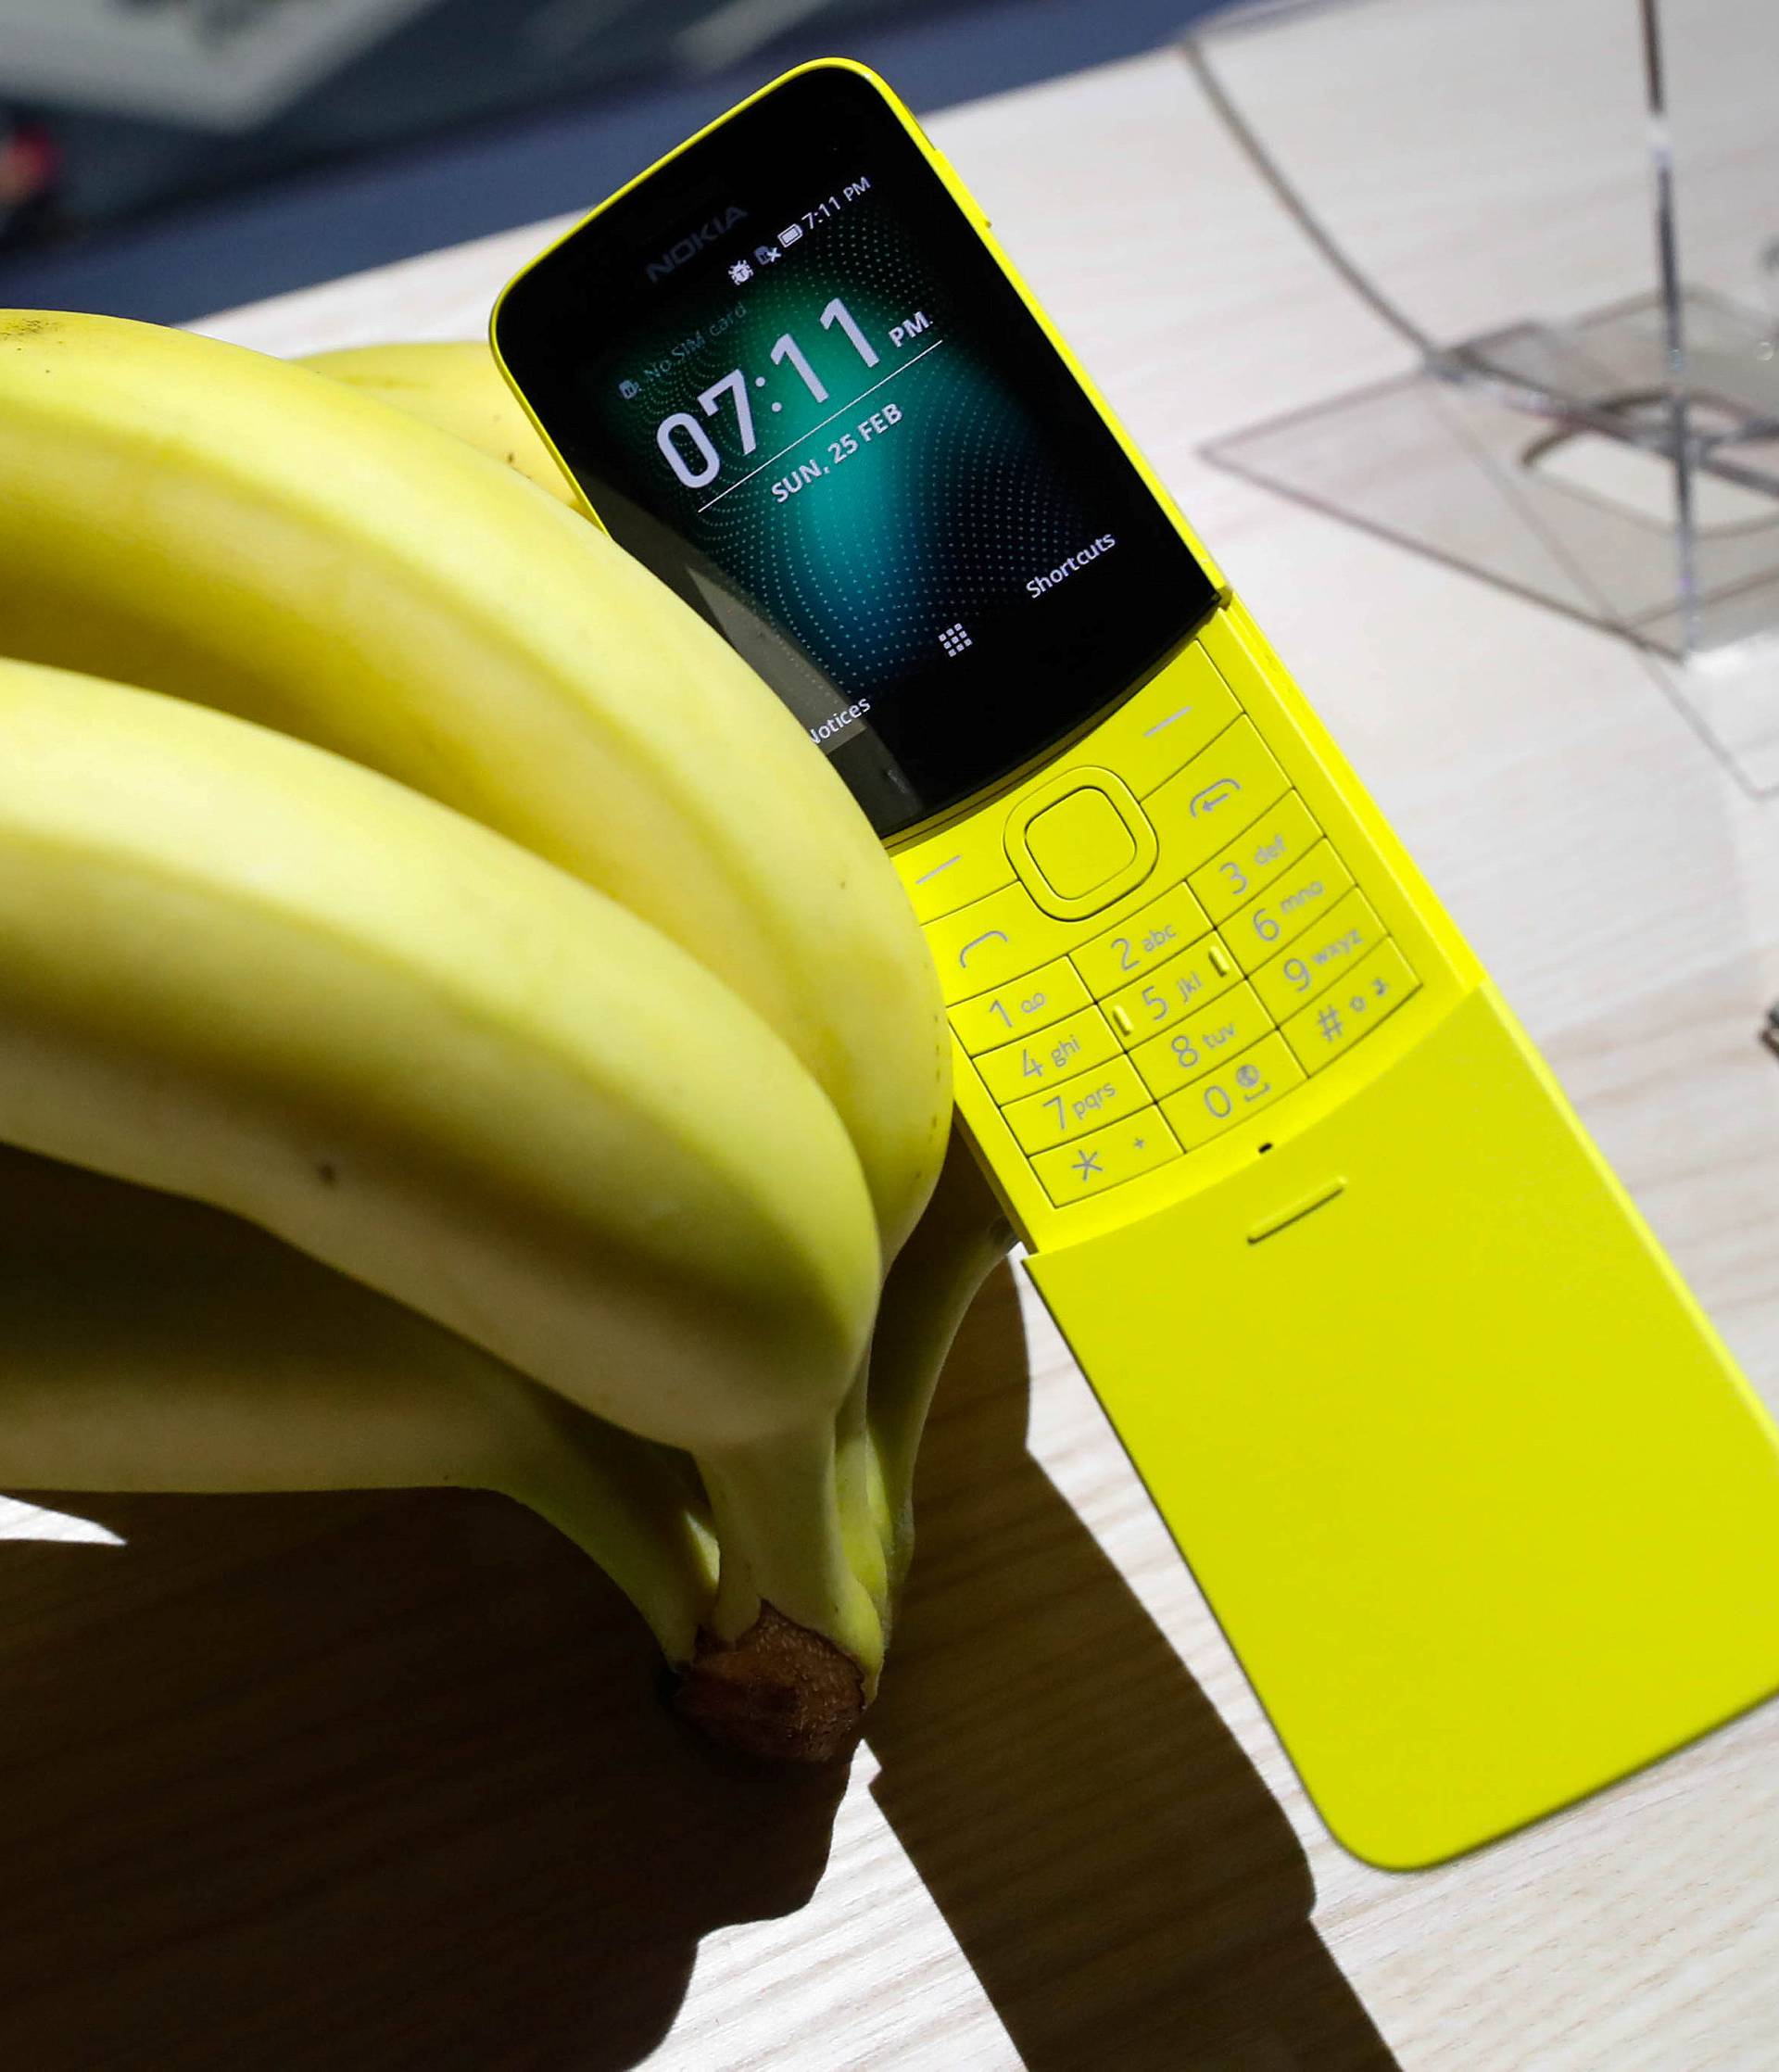 The new Nokia 8110 is displayed during the Mobile World Congress in Barcelona